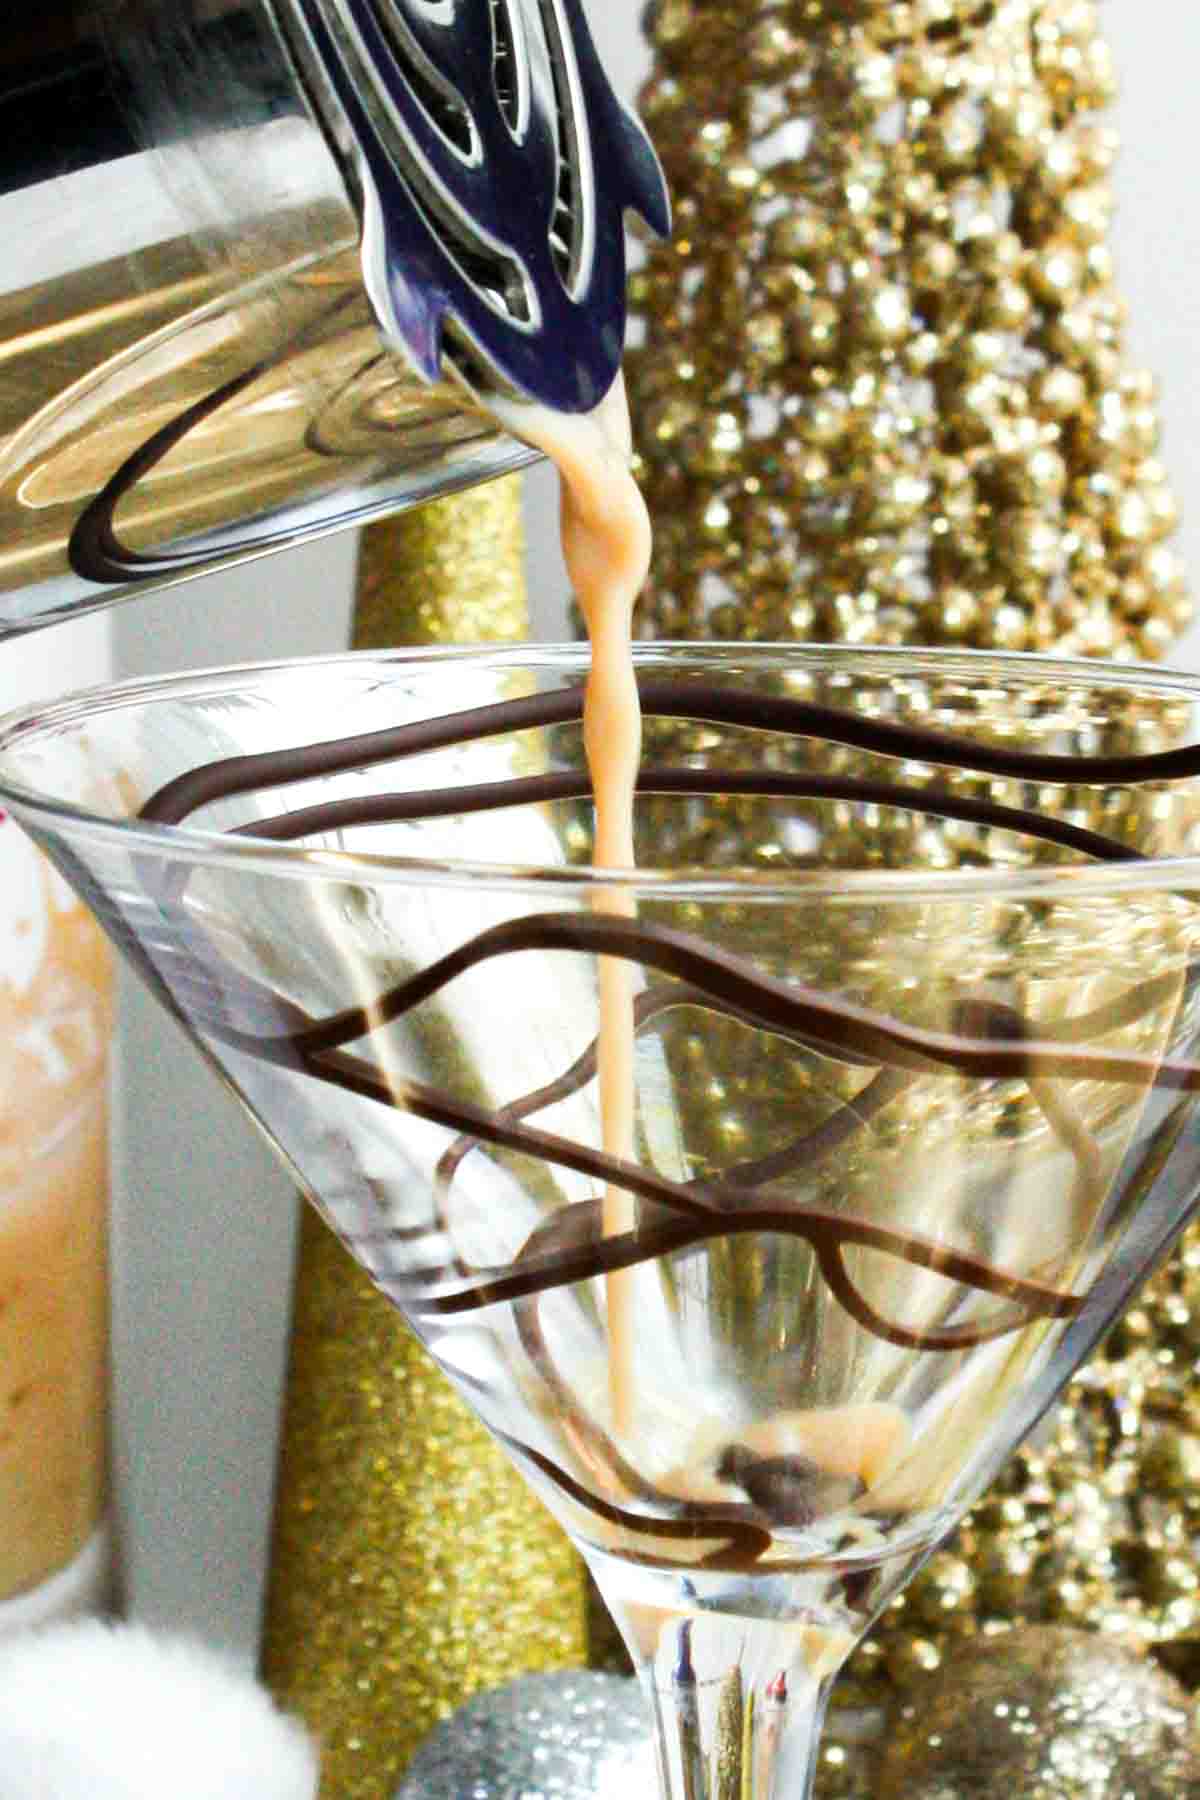 A martini glass with a chocolate martini being poured into it.